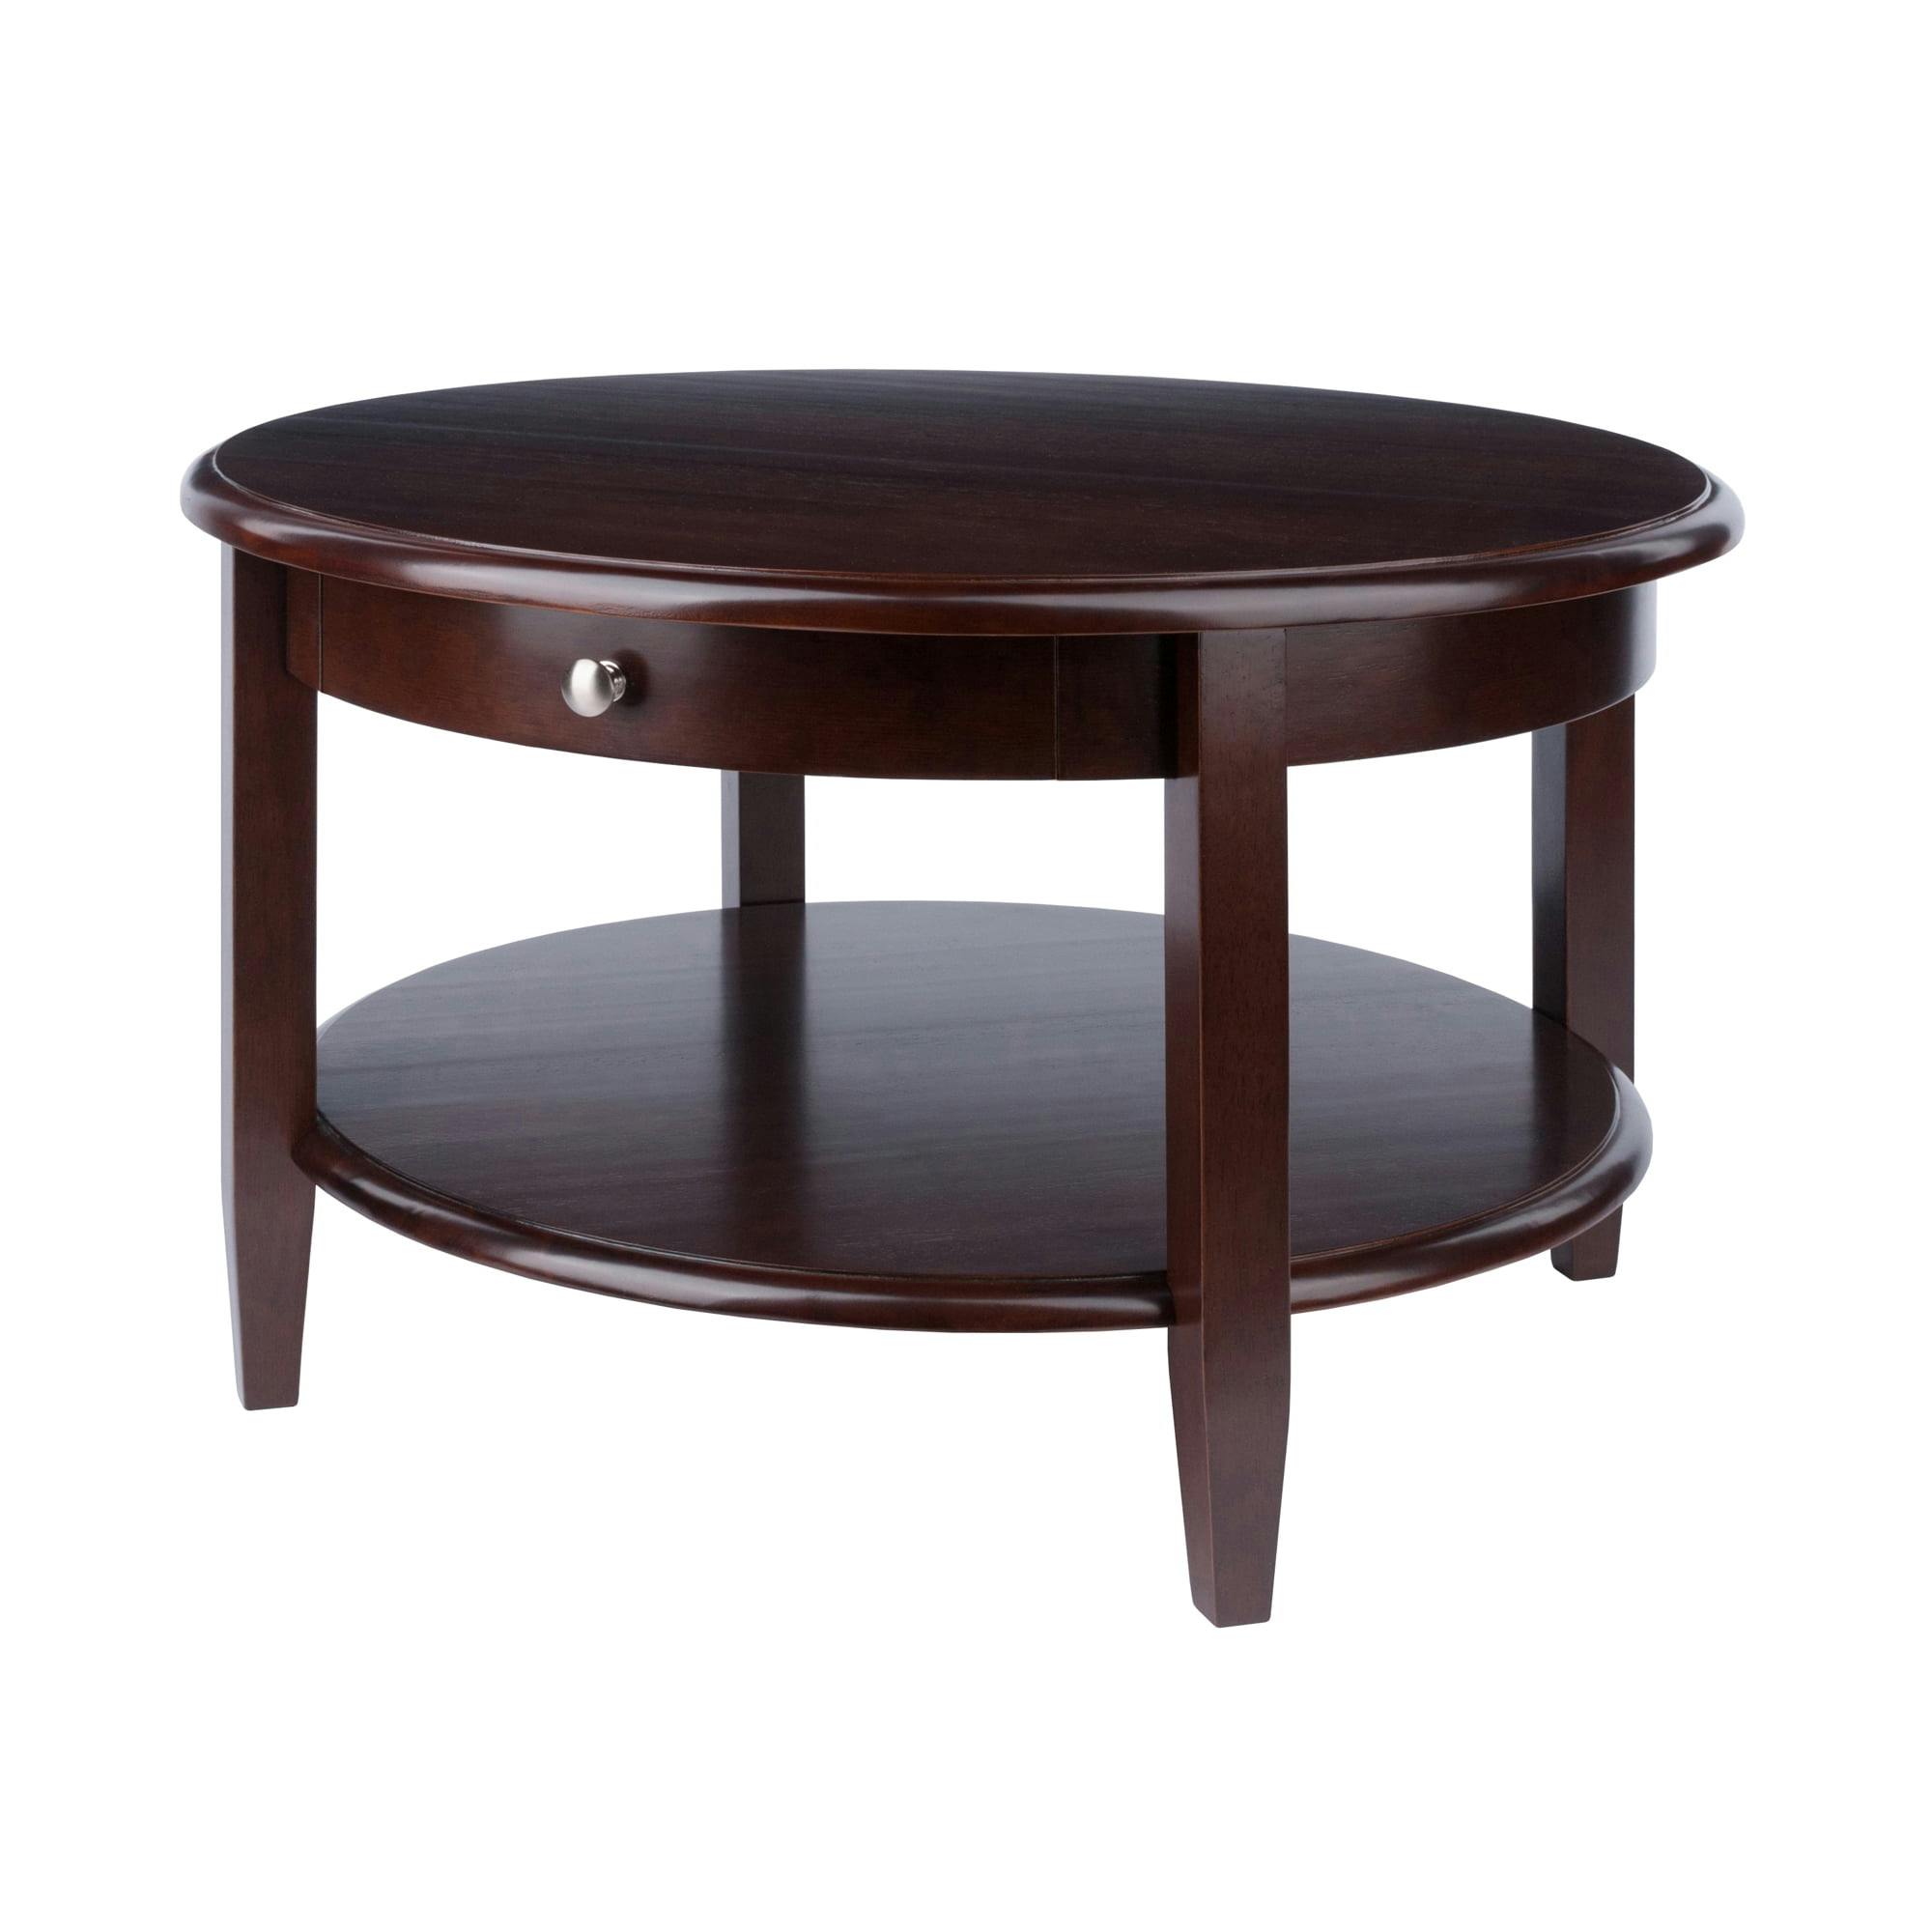 Transitional Antique Walnut Round Outdoor Coffee Table with Storage